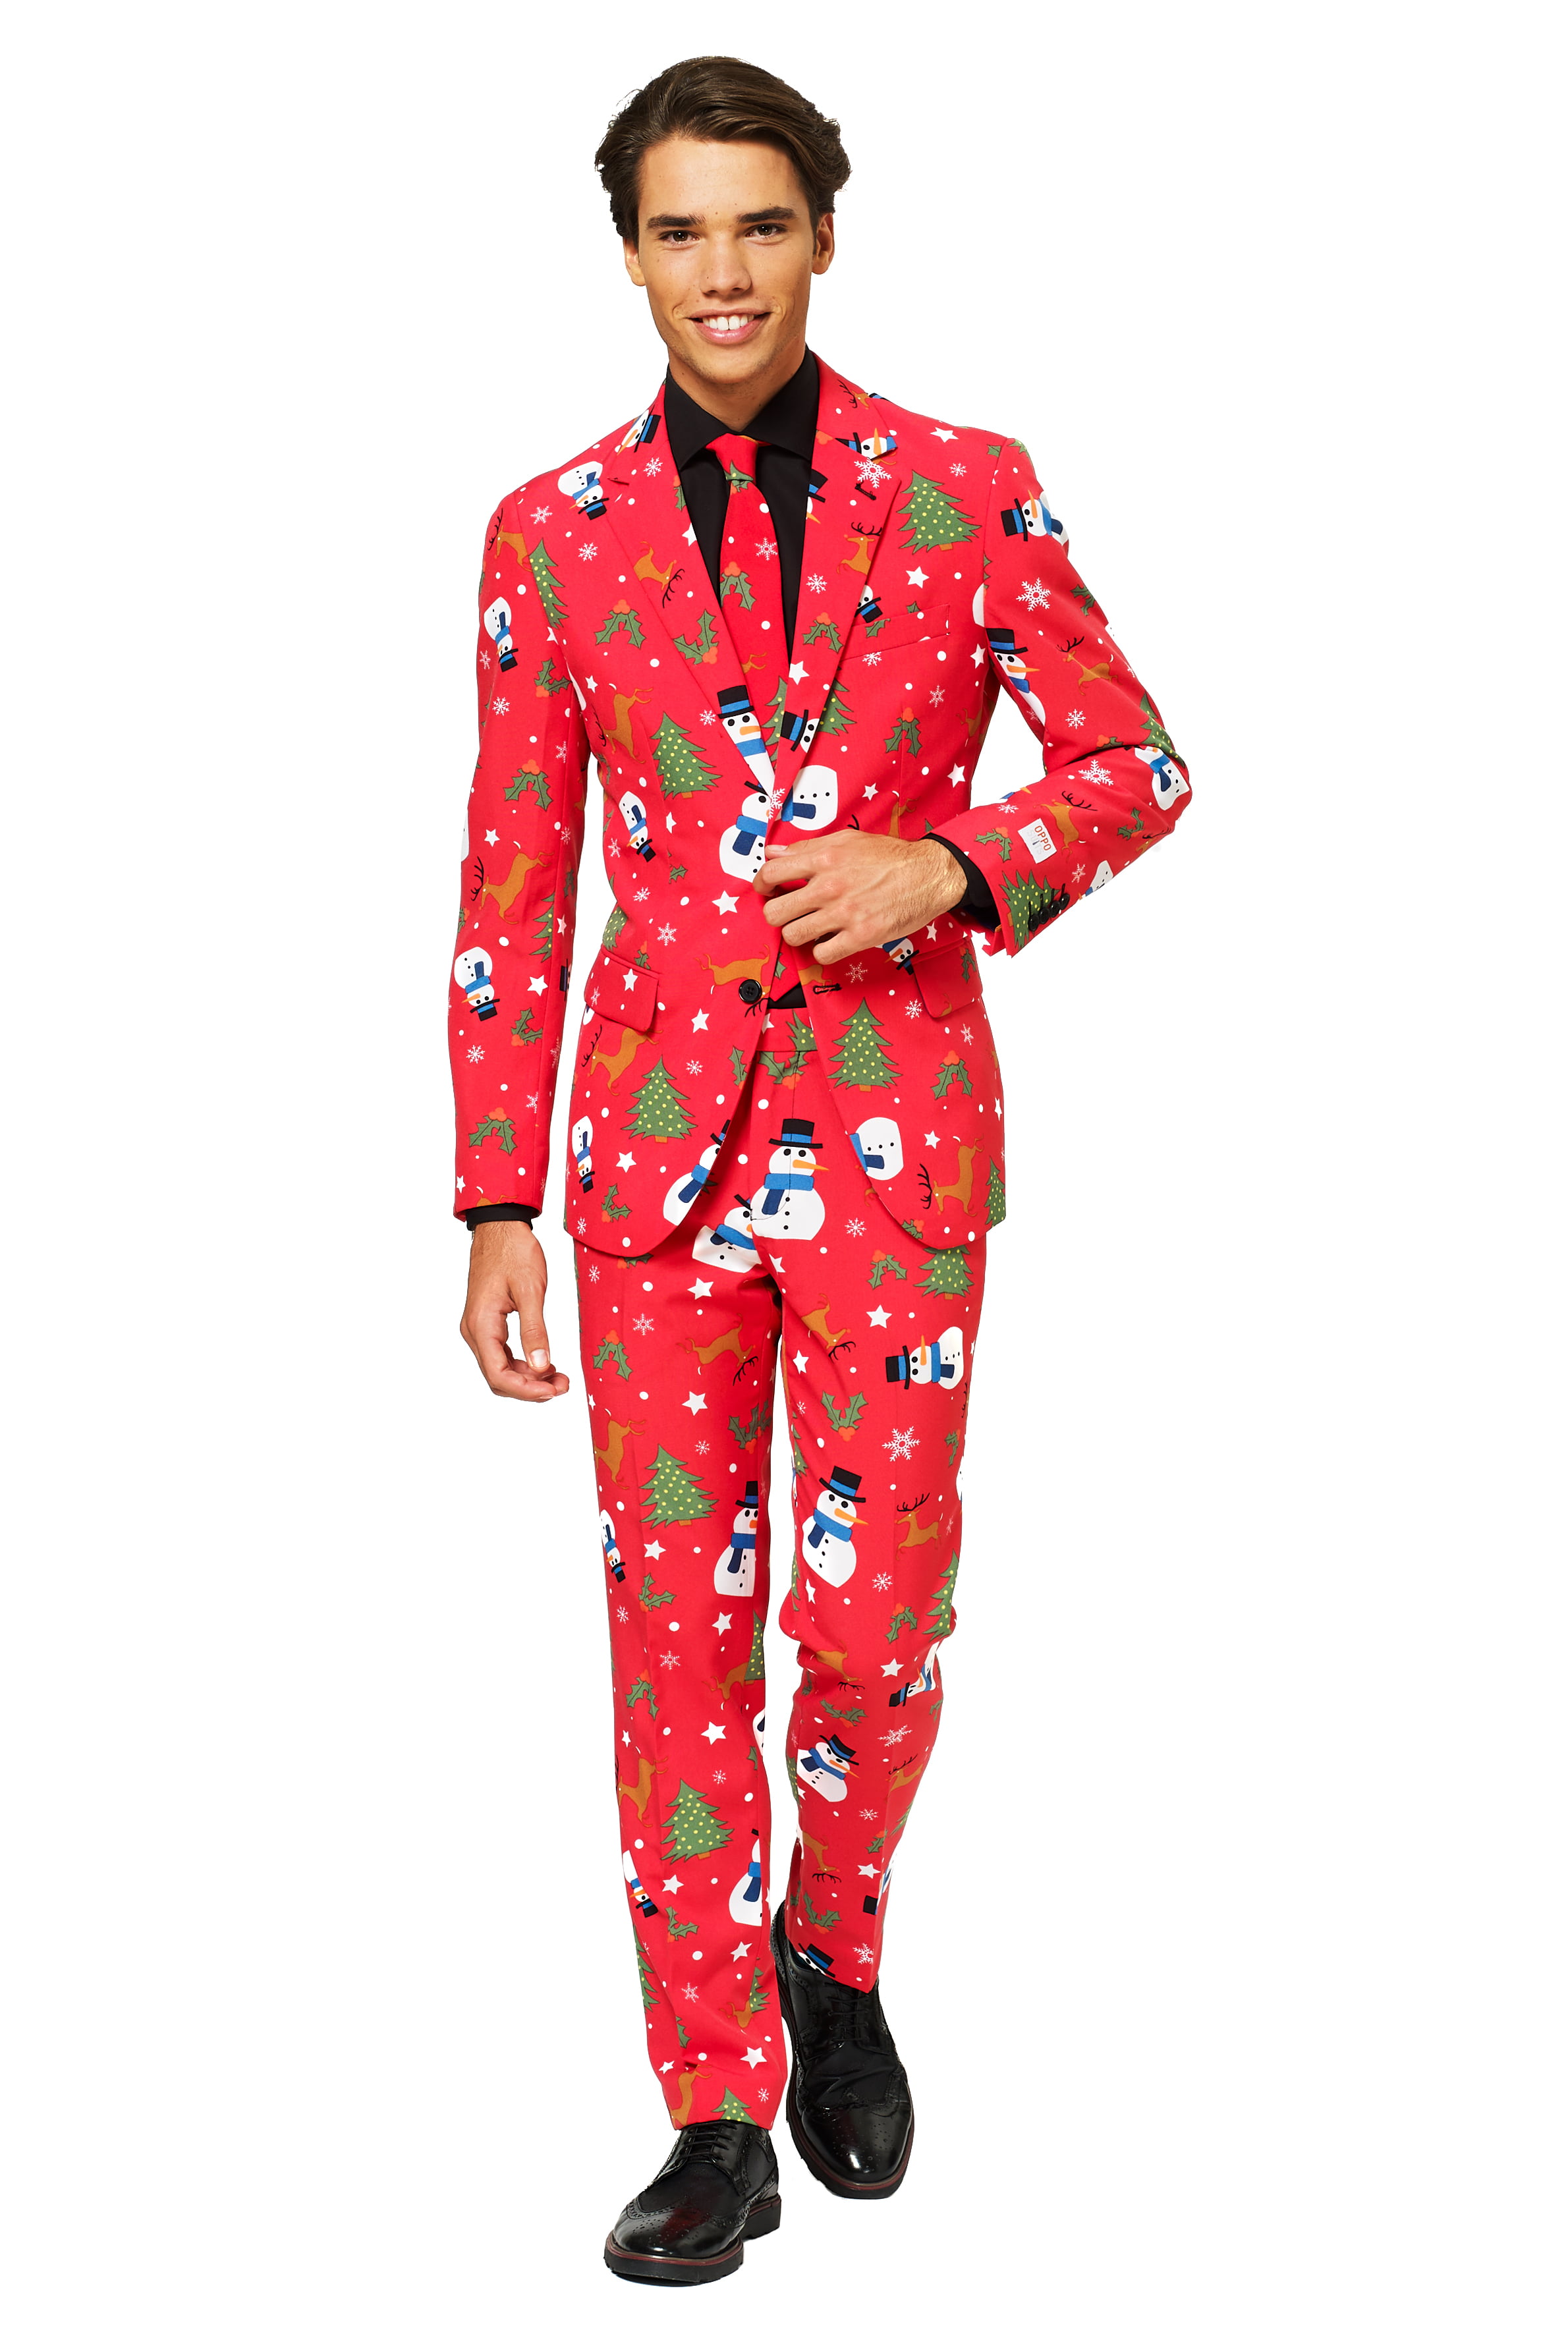 Blue Snowman,S Suitmeister Christmas Suits for Men in Different Prints Ugly Xmas Sweater Costumes Include Jacket Pants & Tie